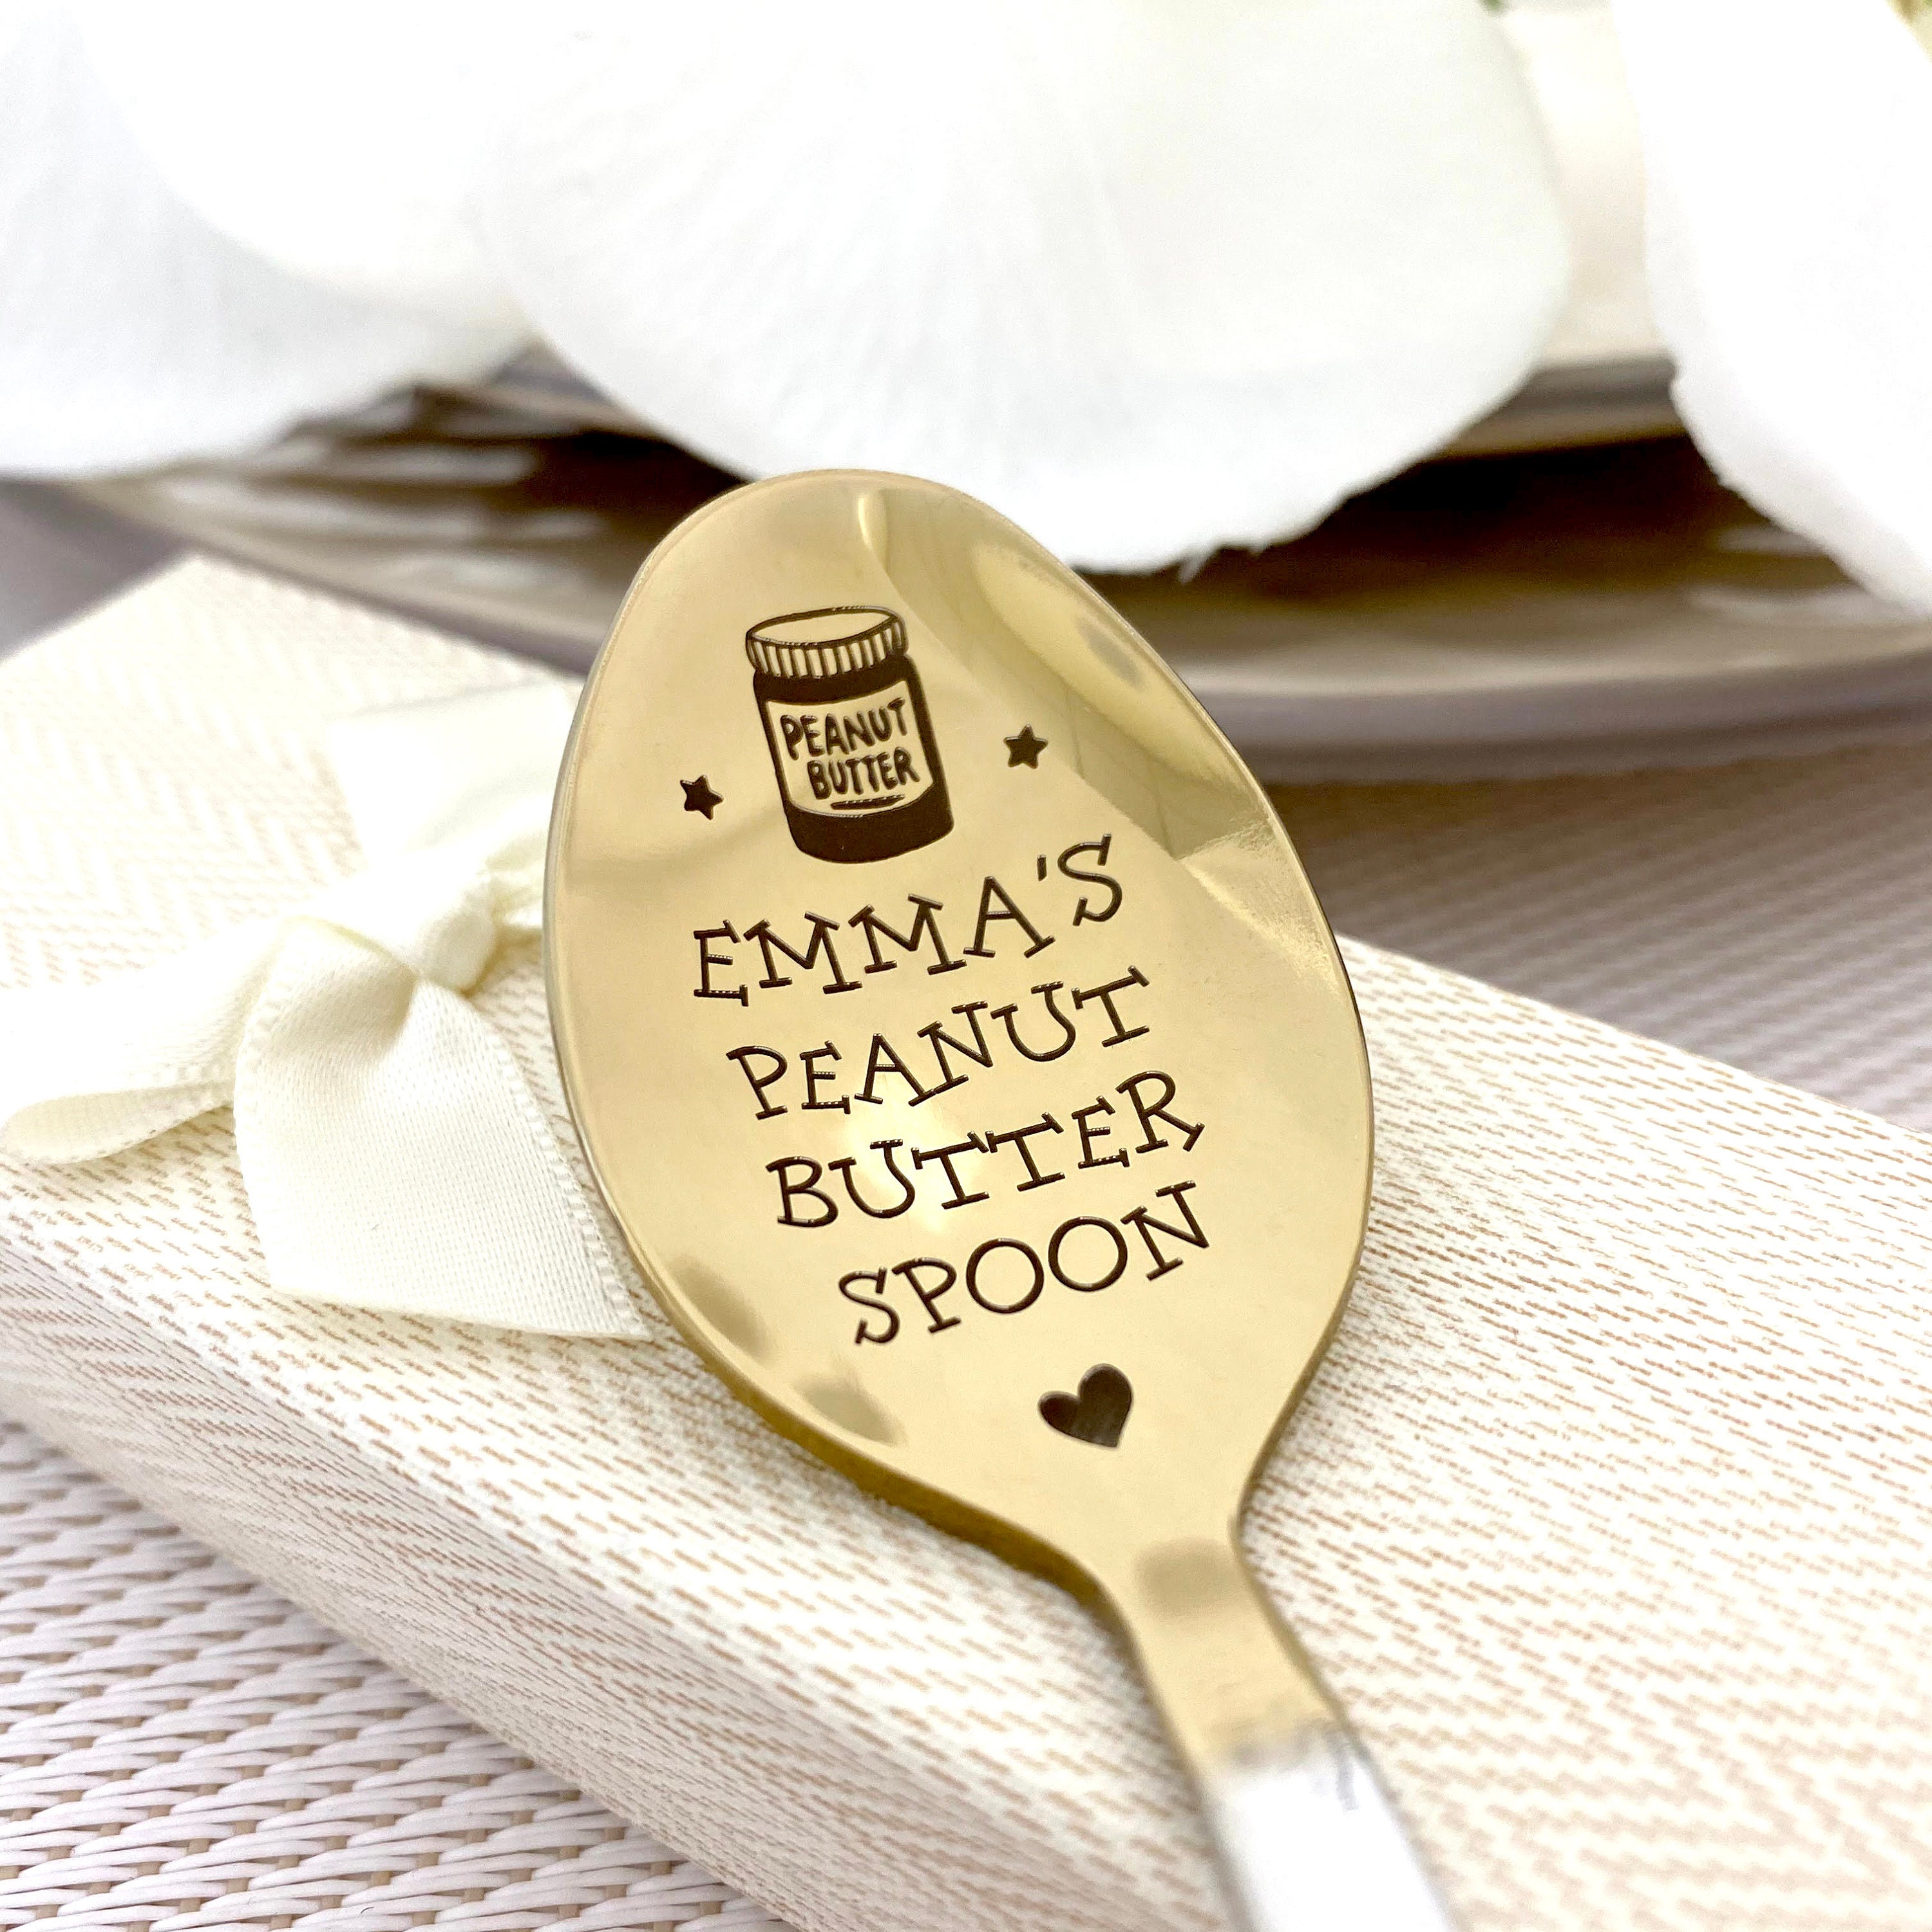 Peanut-butter-knife-spoon-fork-custom-stamped-name-personalized-gift-engraved-shabby-chic-silverware-server-teaspoon-tablespoon-silver-jelly  